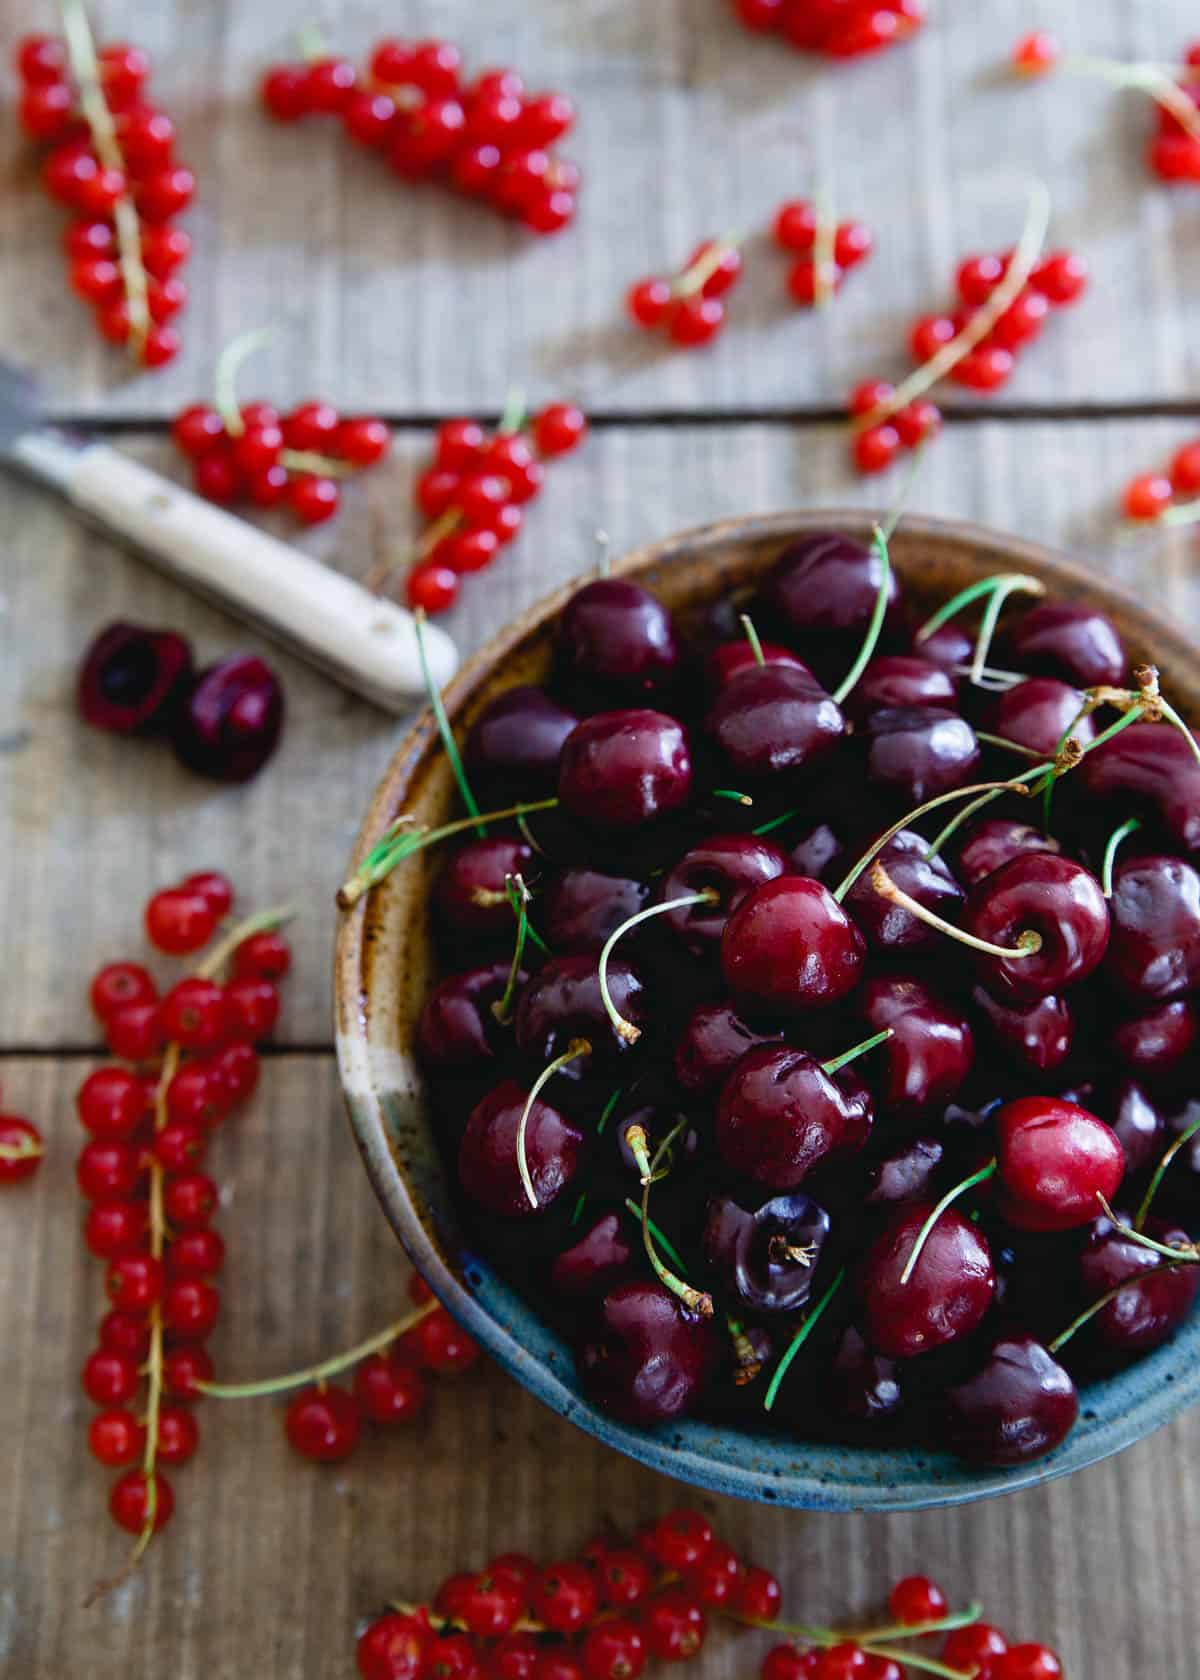 Cherries and Currants make this Baby Kale Chicken Cherry Salad a healthy, light summer meal.